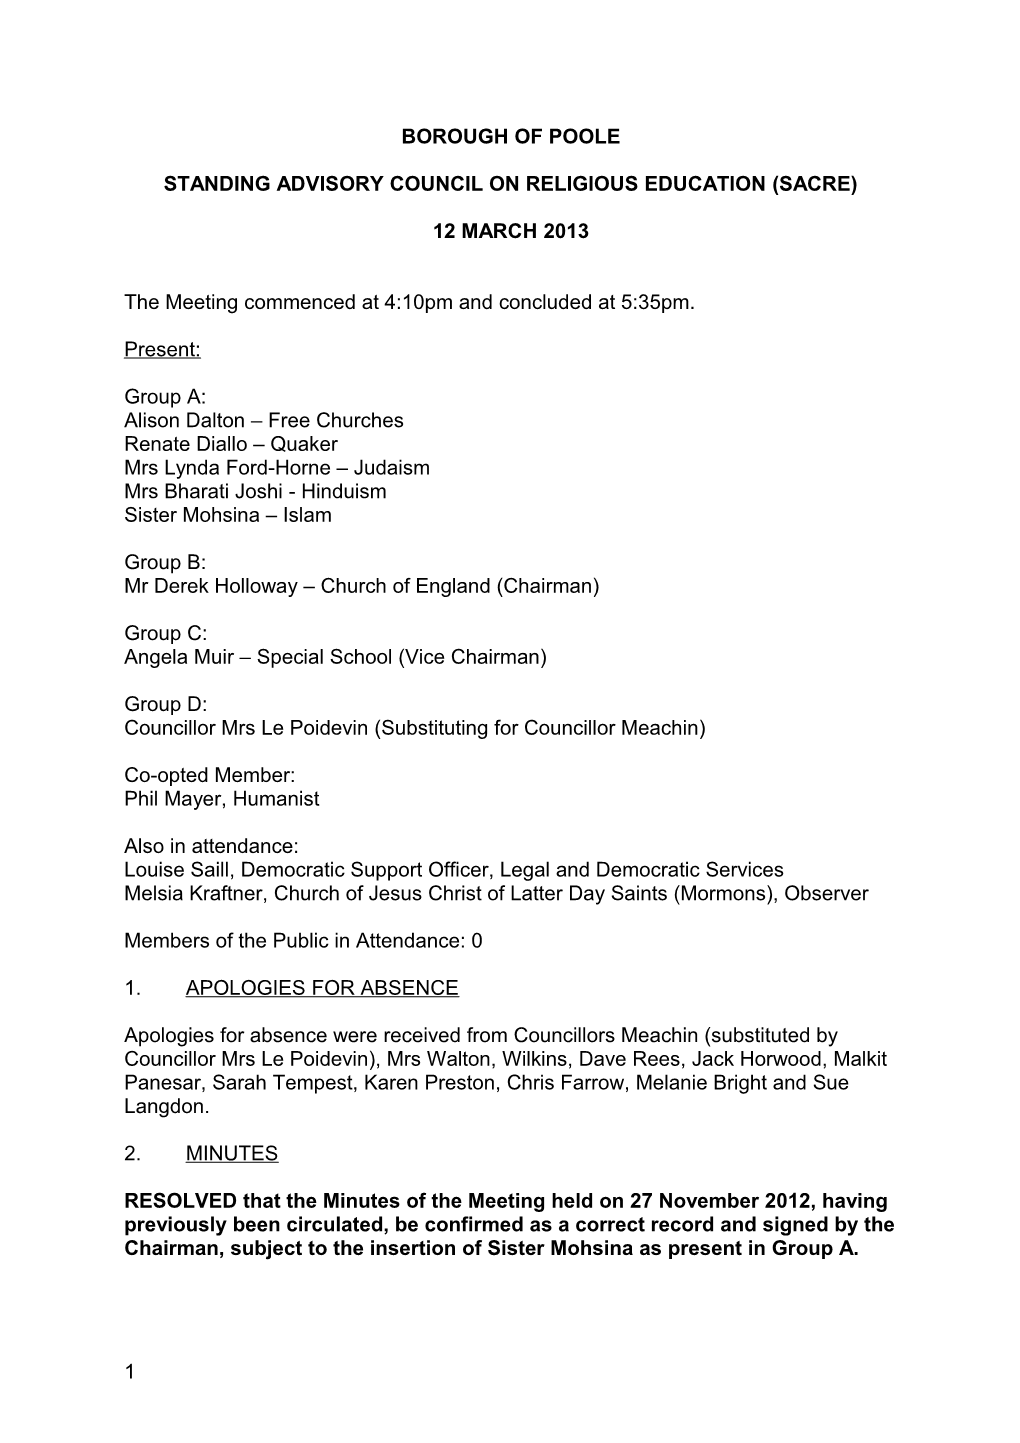 Standing Advisory Council on Religious Education (Sacre)